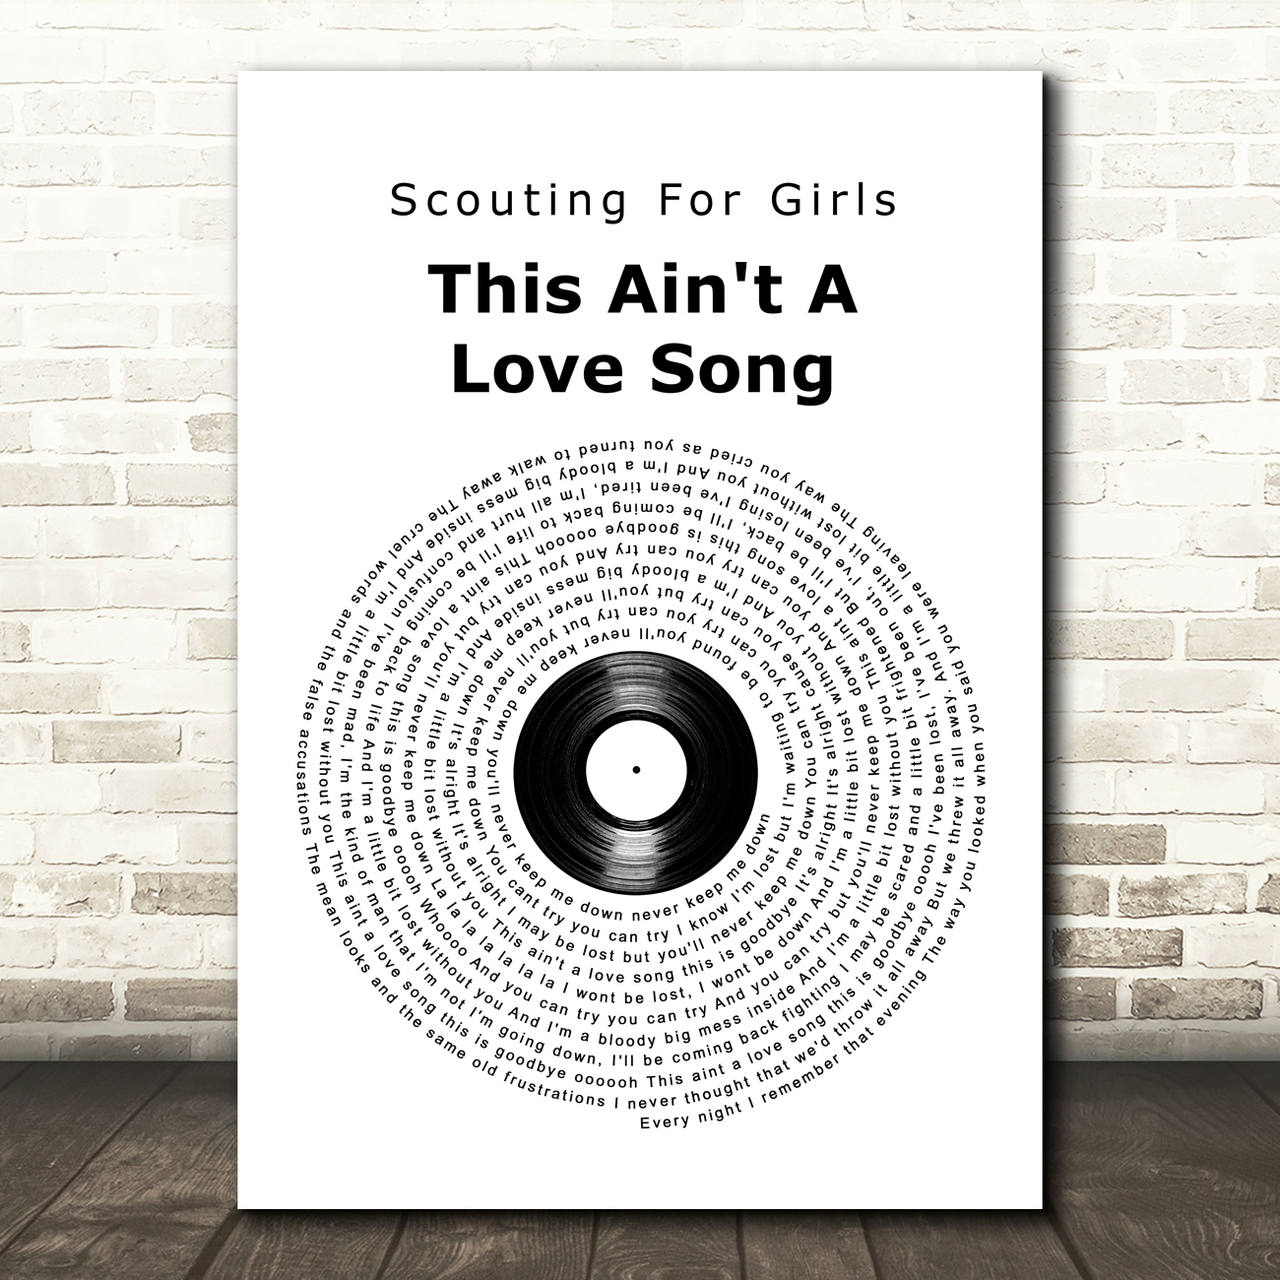 Scouting For Girls This Ain't A Love Song Vinyl Record Song Lyric Art Print